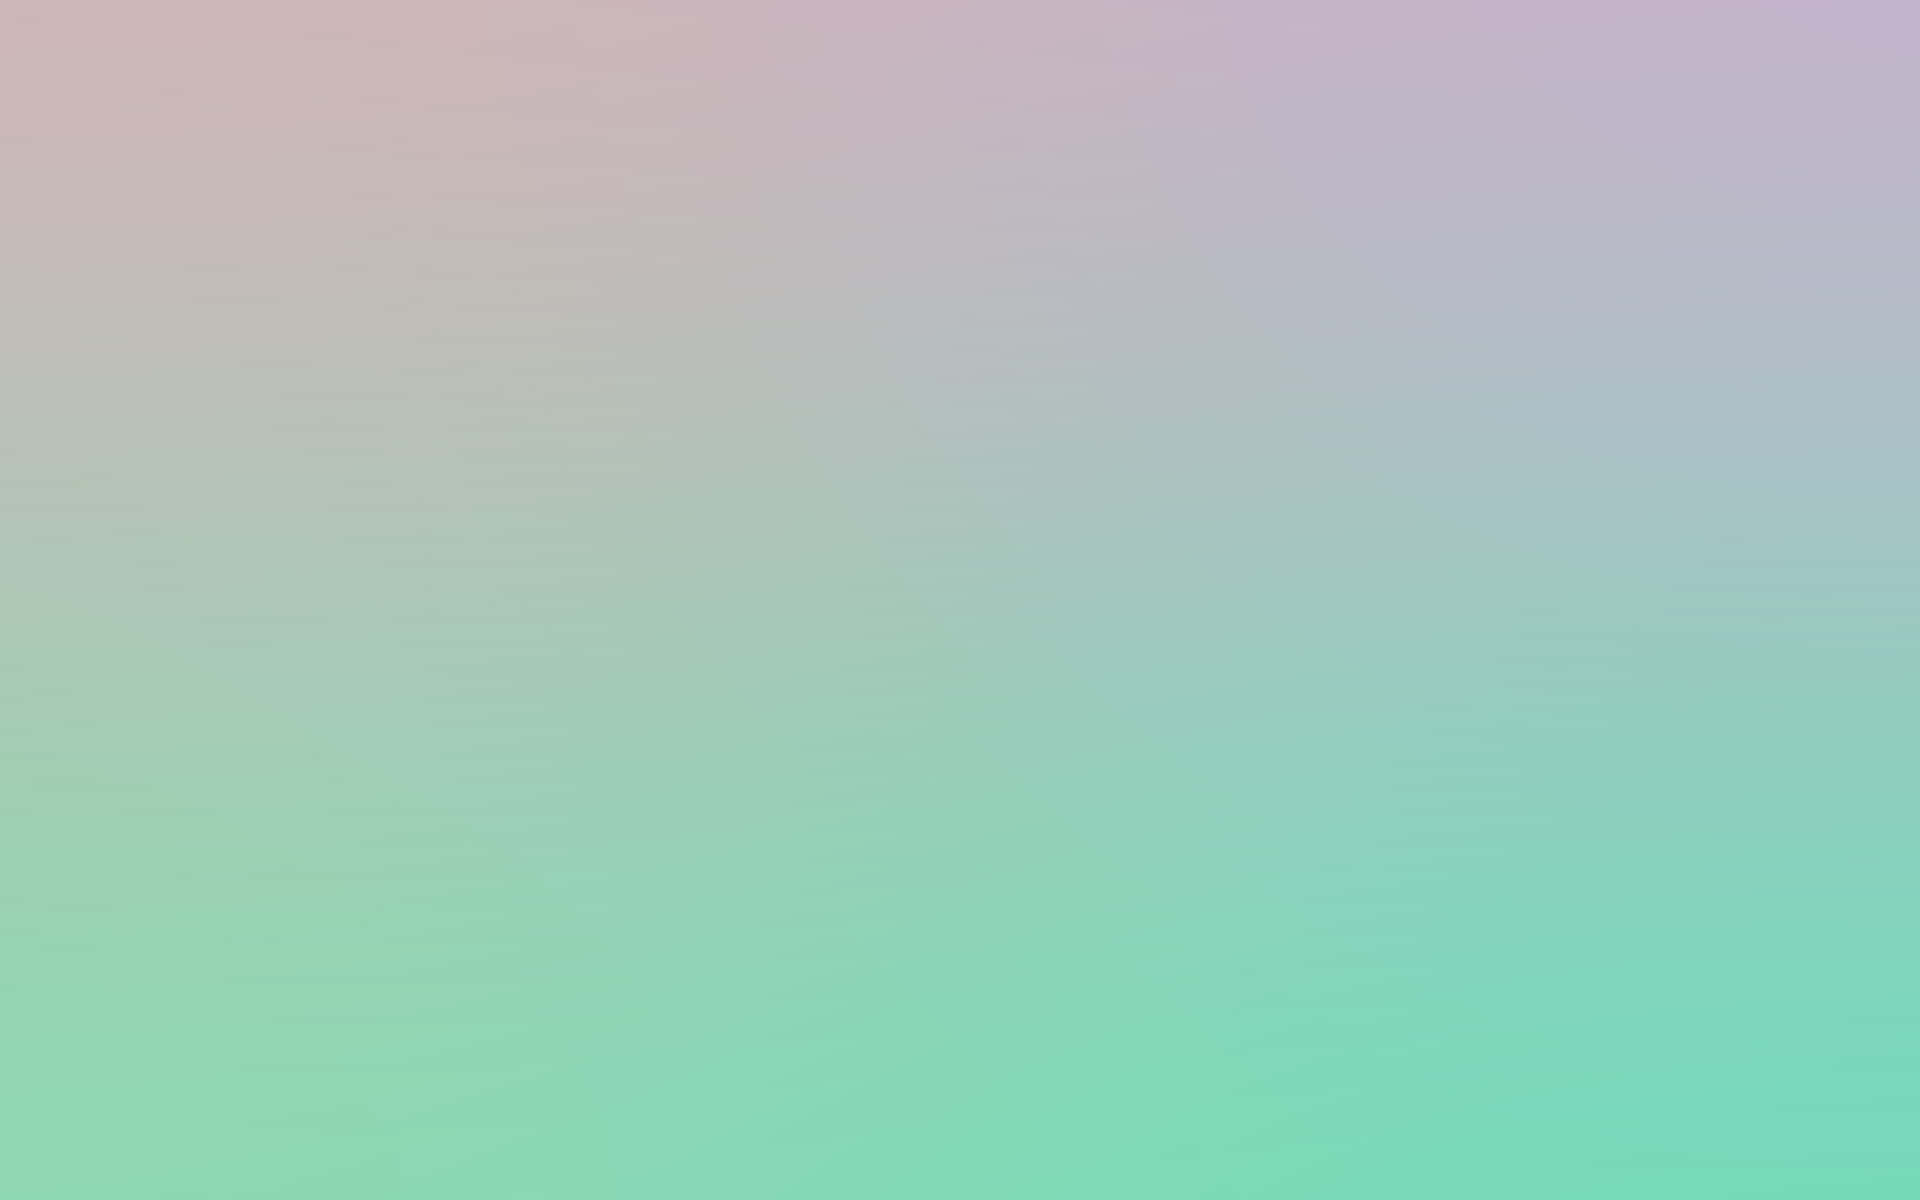 A Pink And Green Gradient Background With A Rainbow